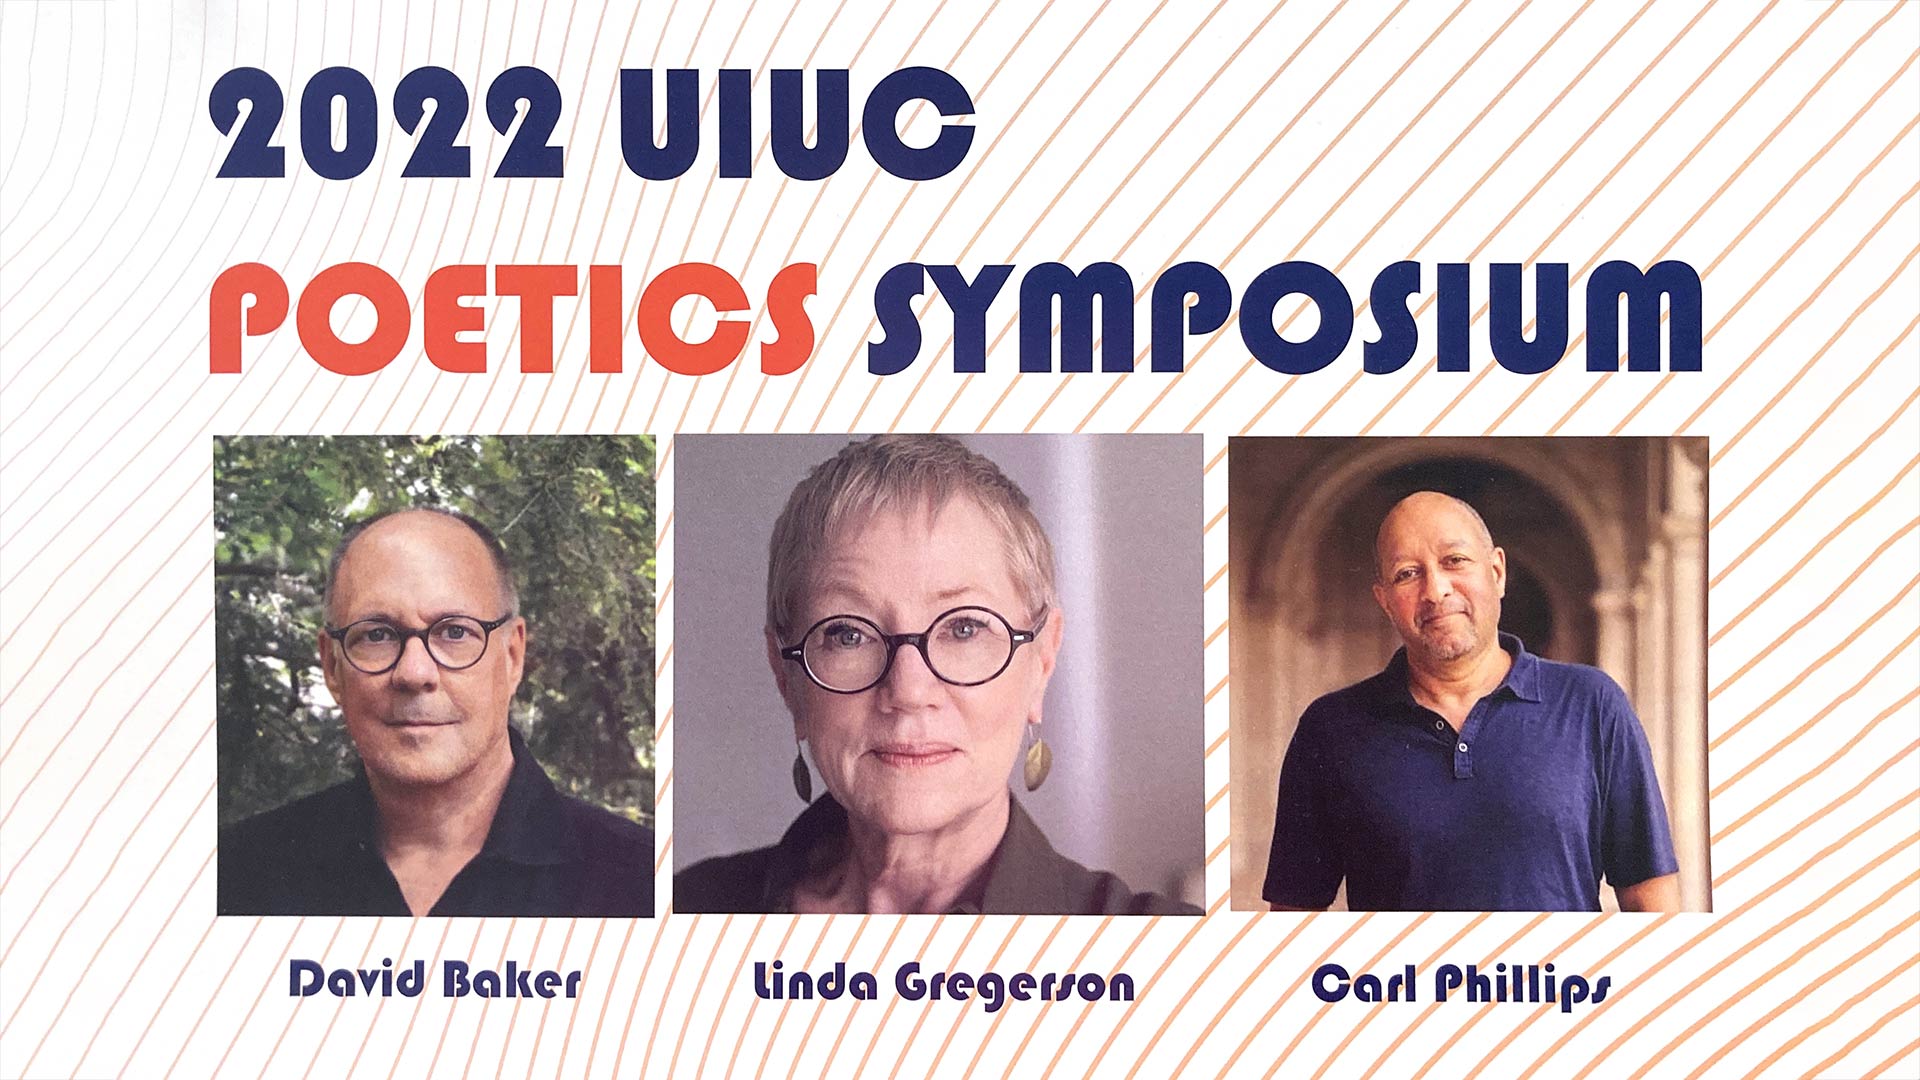 2022 UIUC Poetics Symposium title with headshots of David Baker, Linda Gregerson, and Carl Phillips